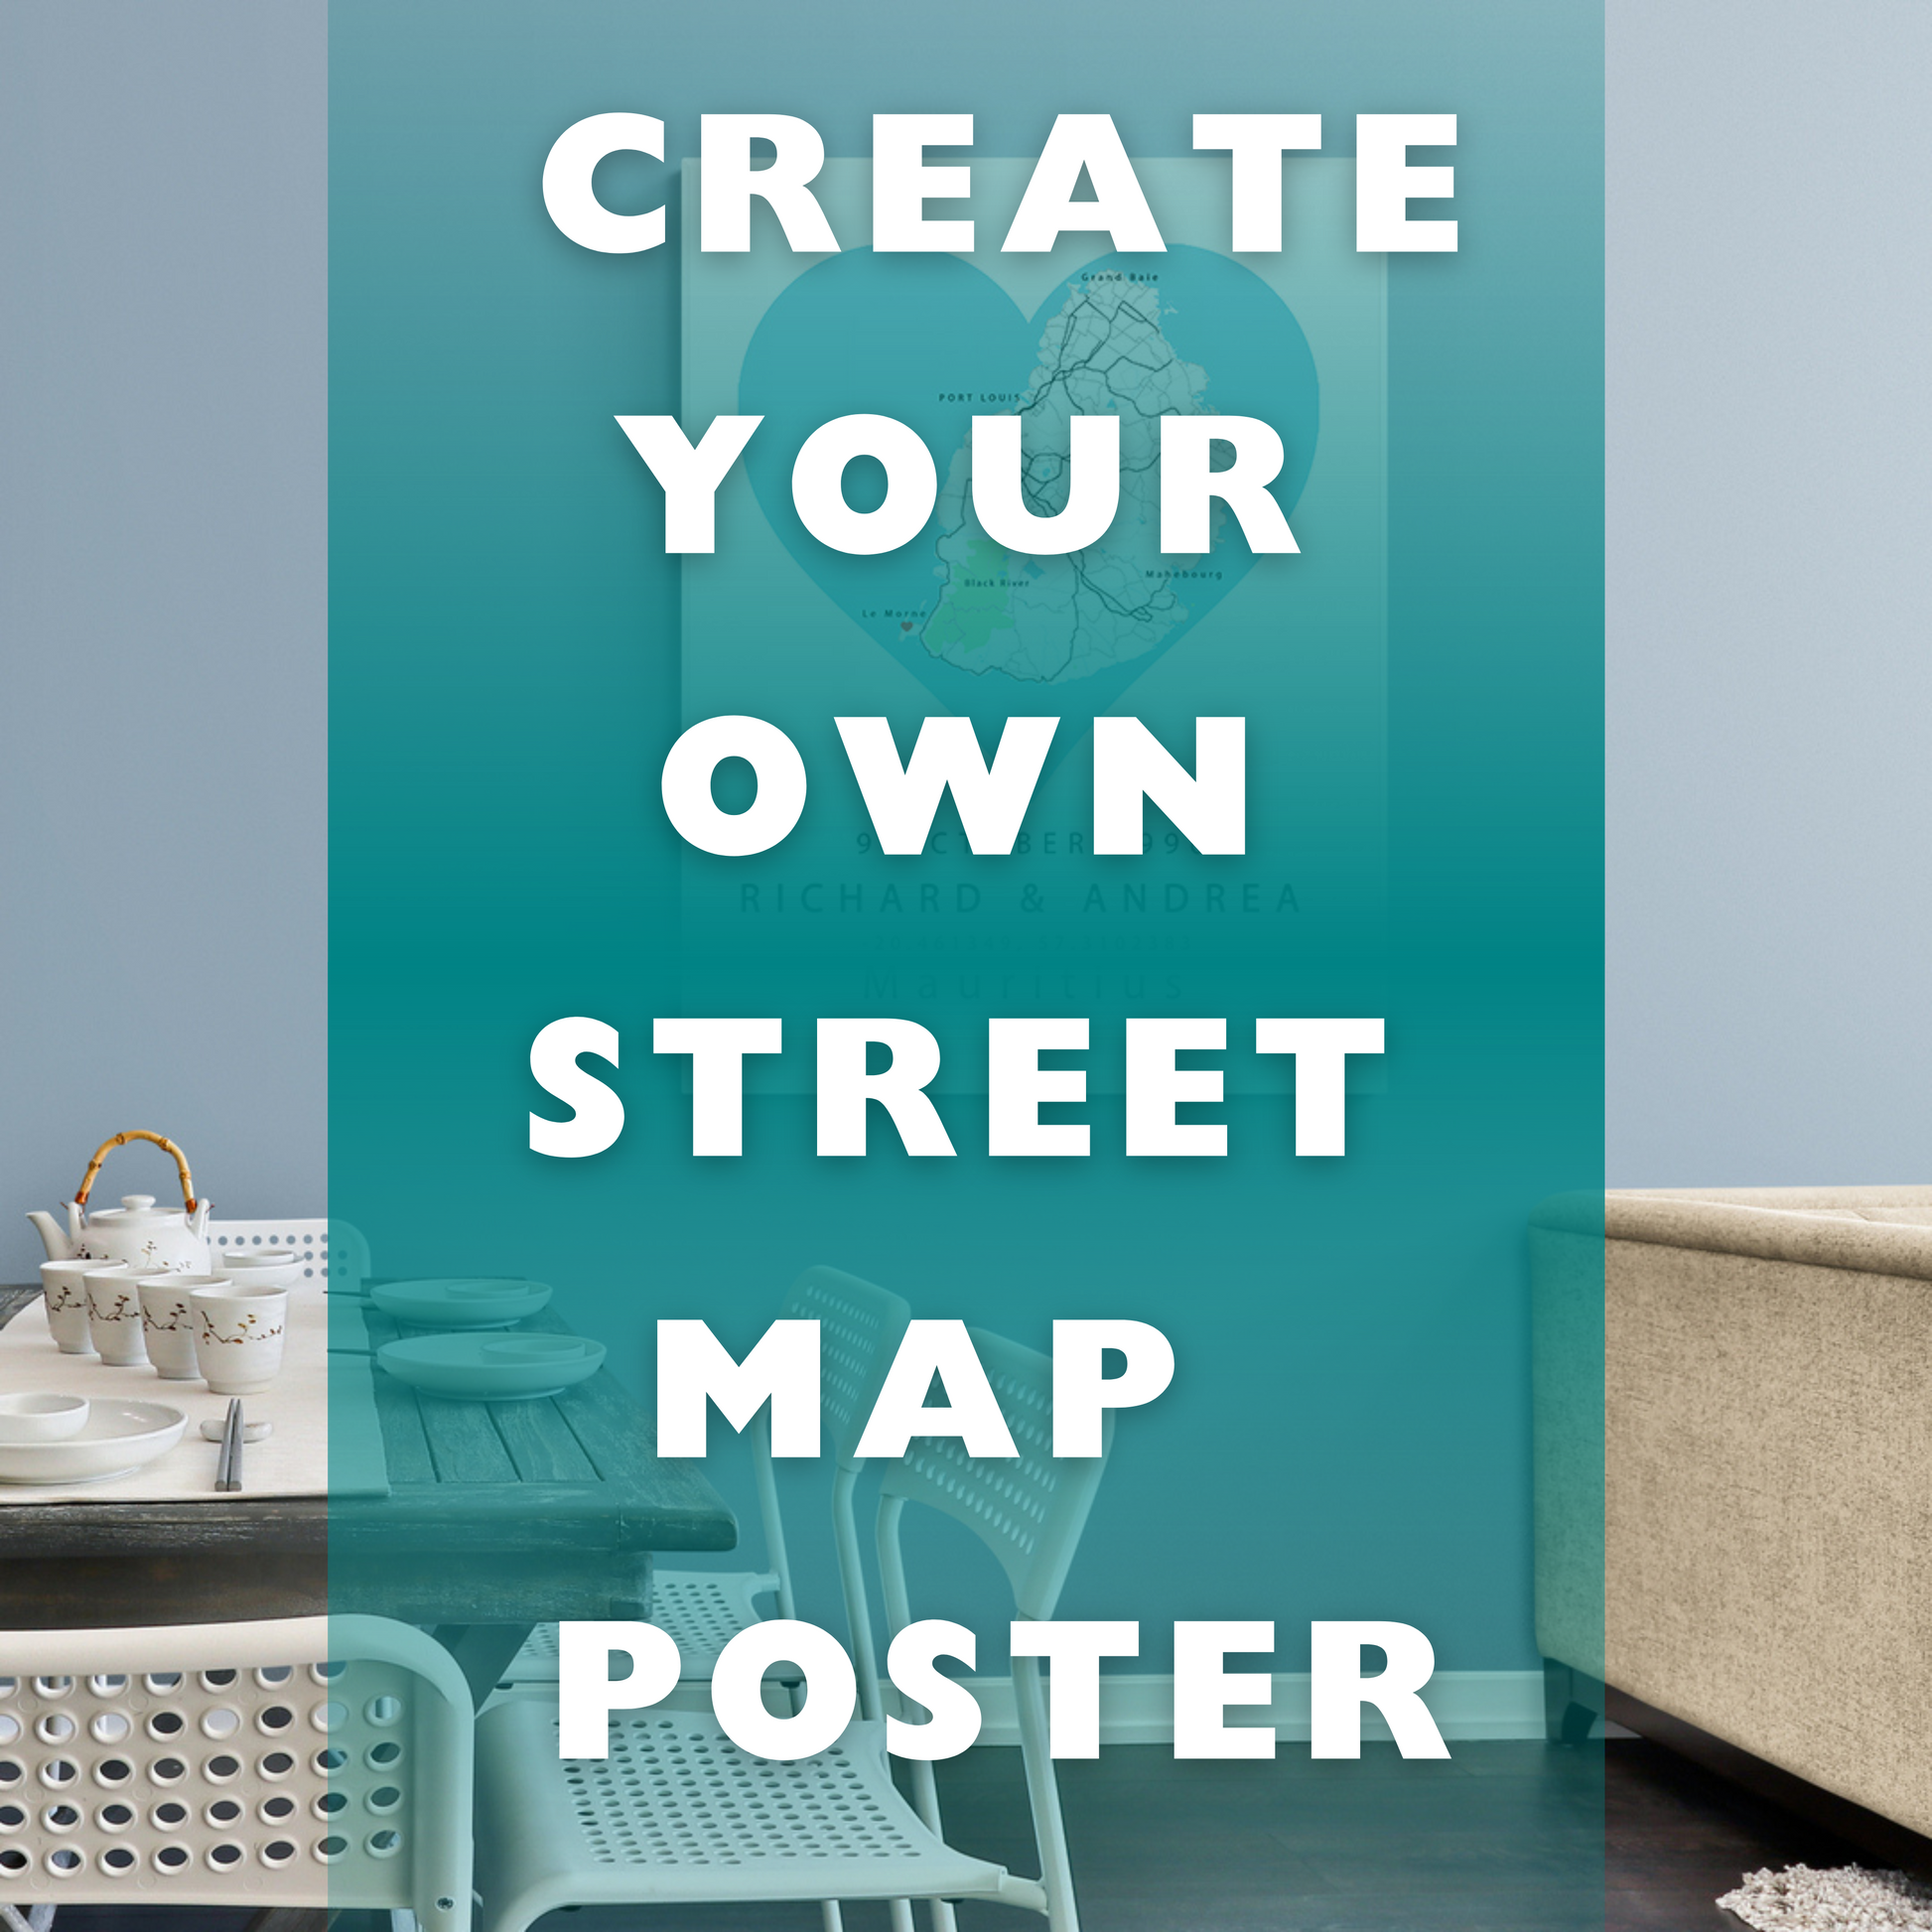  Where We Met Map. Our custom street map prints are the perfect way to commemorate the place you and your significant other met. Which attractive streetscape should we render? Tell us which landmarks you'd like to have immortalised in artwork!